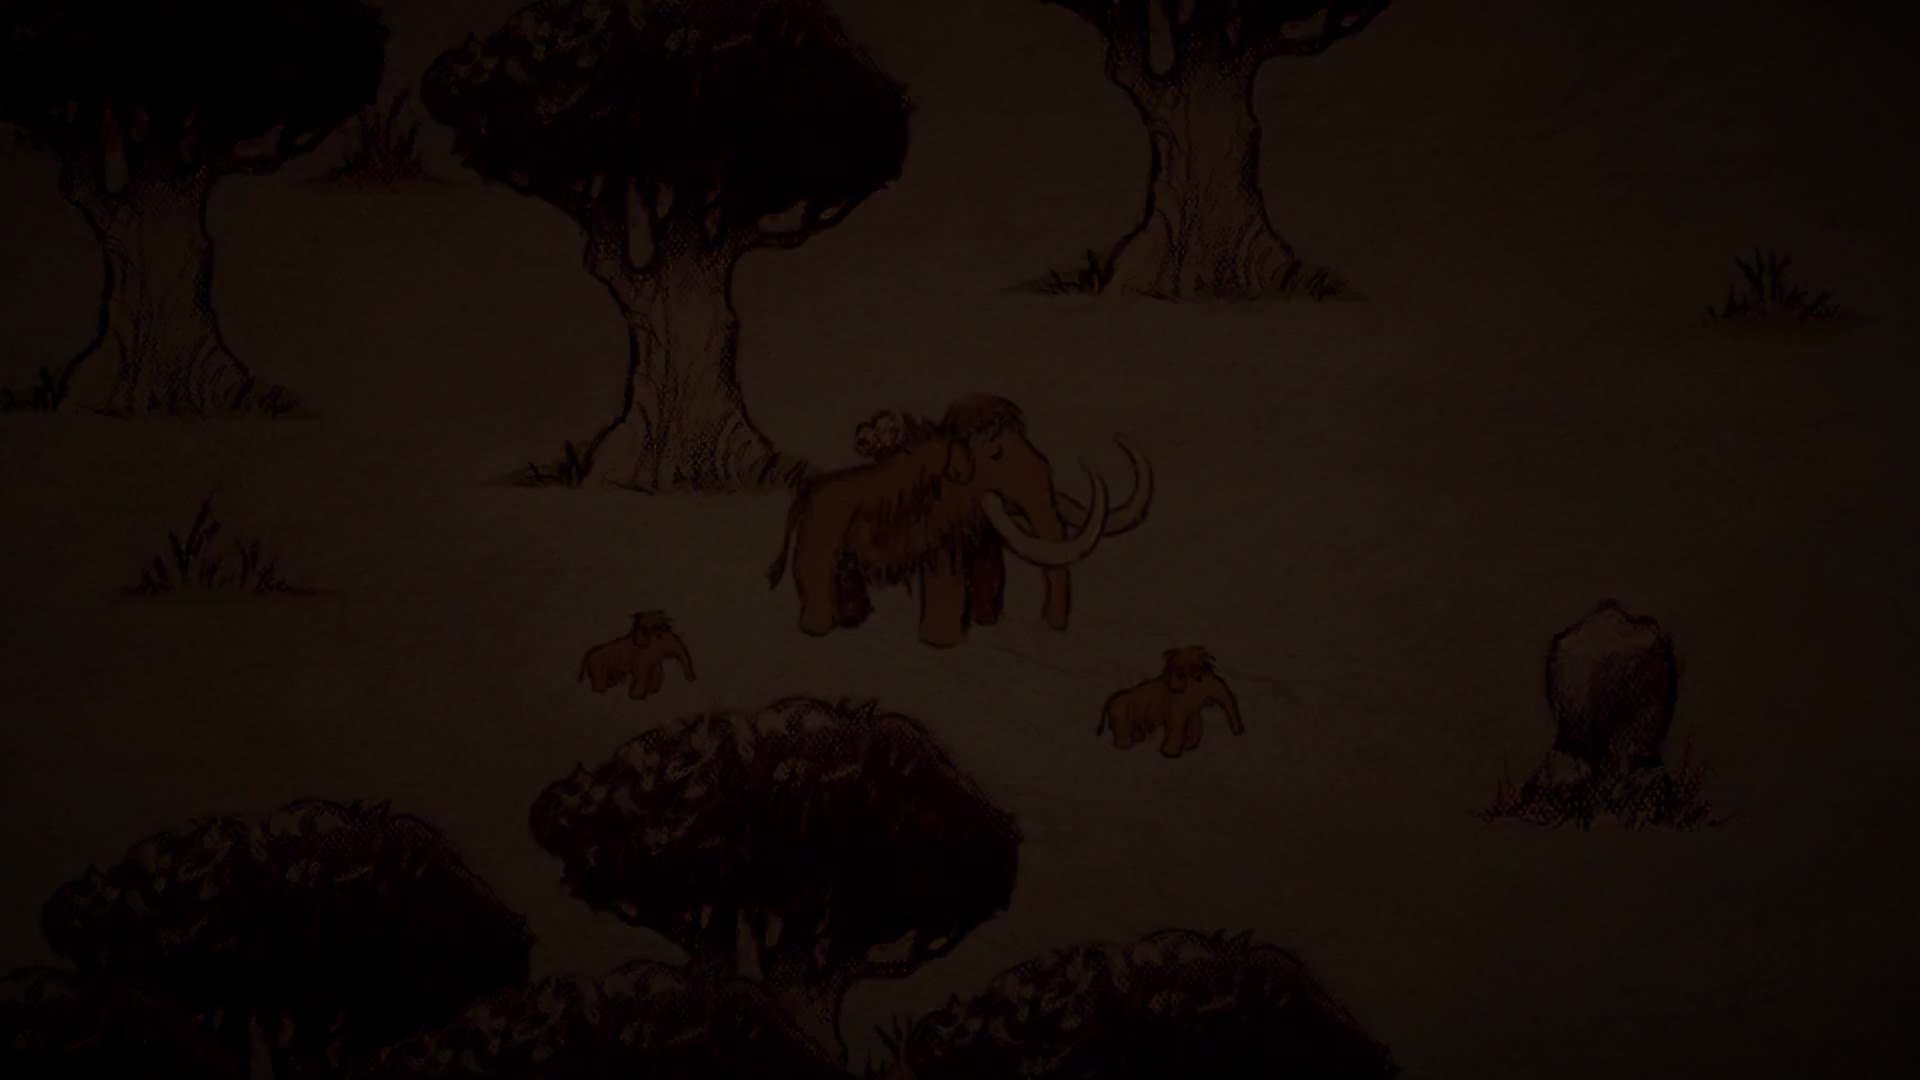 The Mammoth: A Cave Painting - trailer